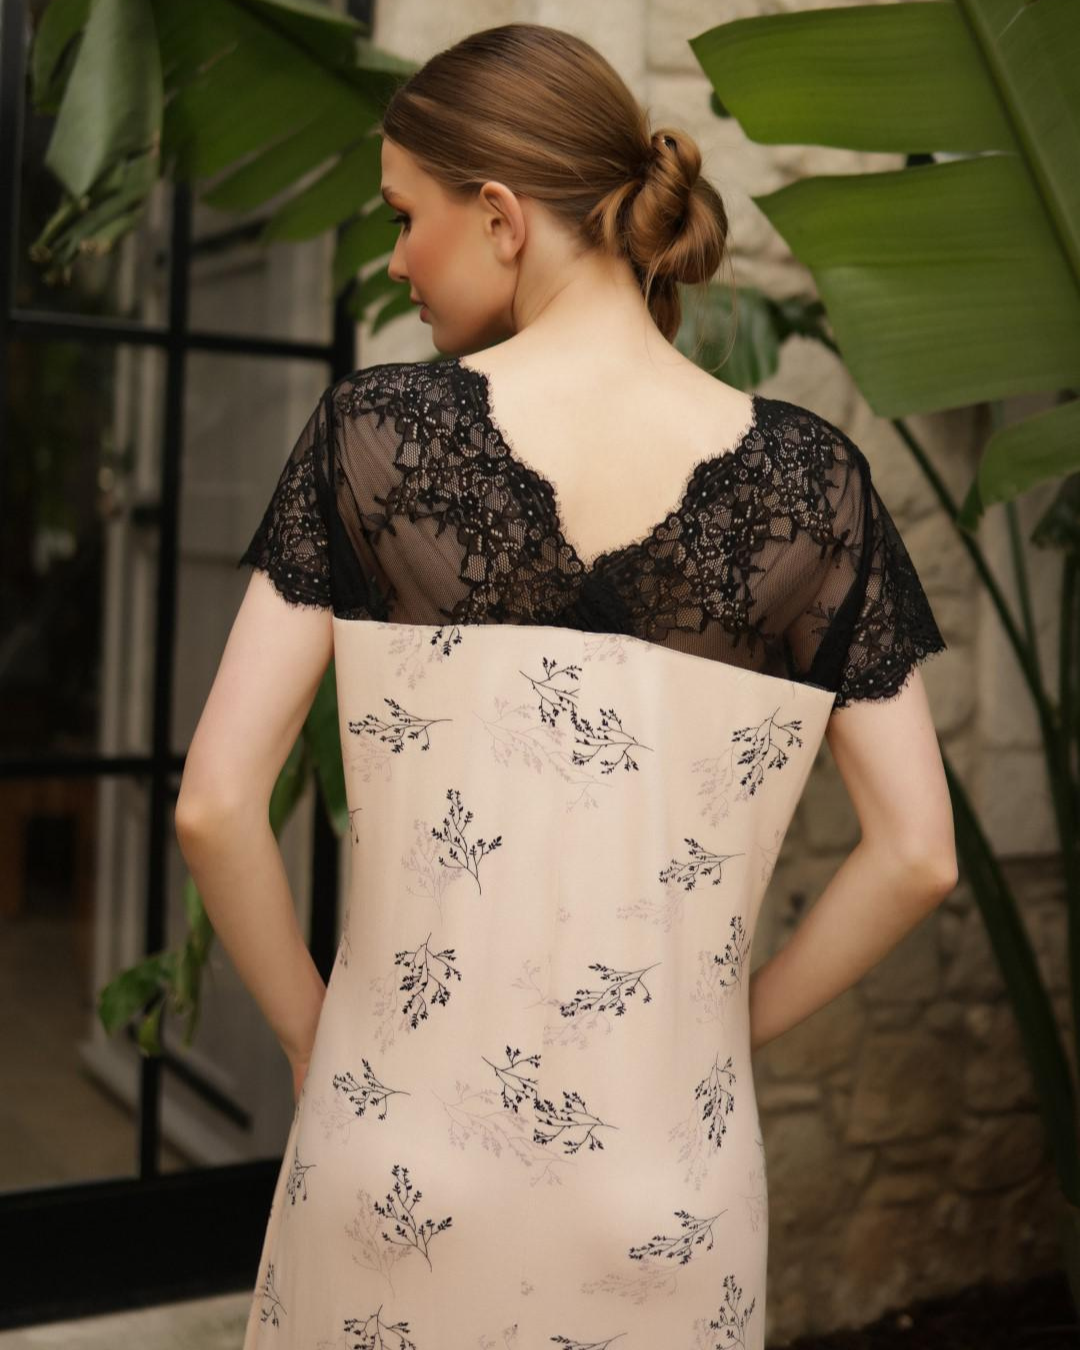 Women's short shirt with half sleeves, lace back, and floral lace